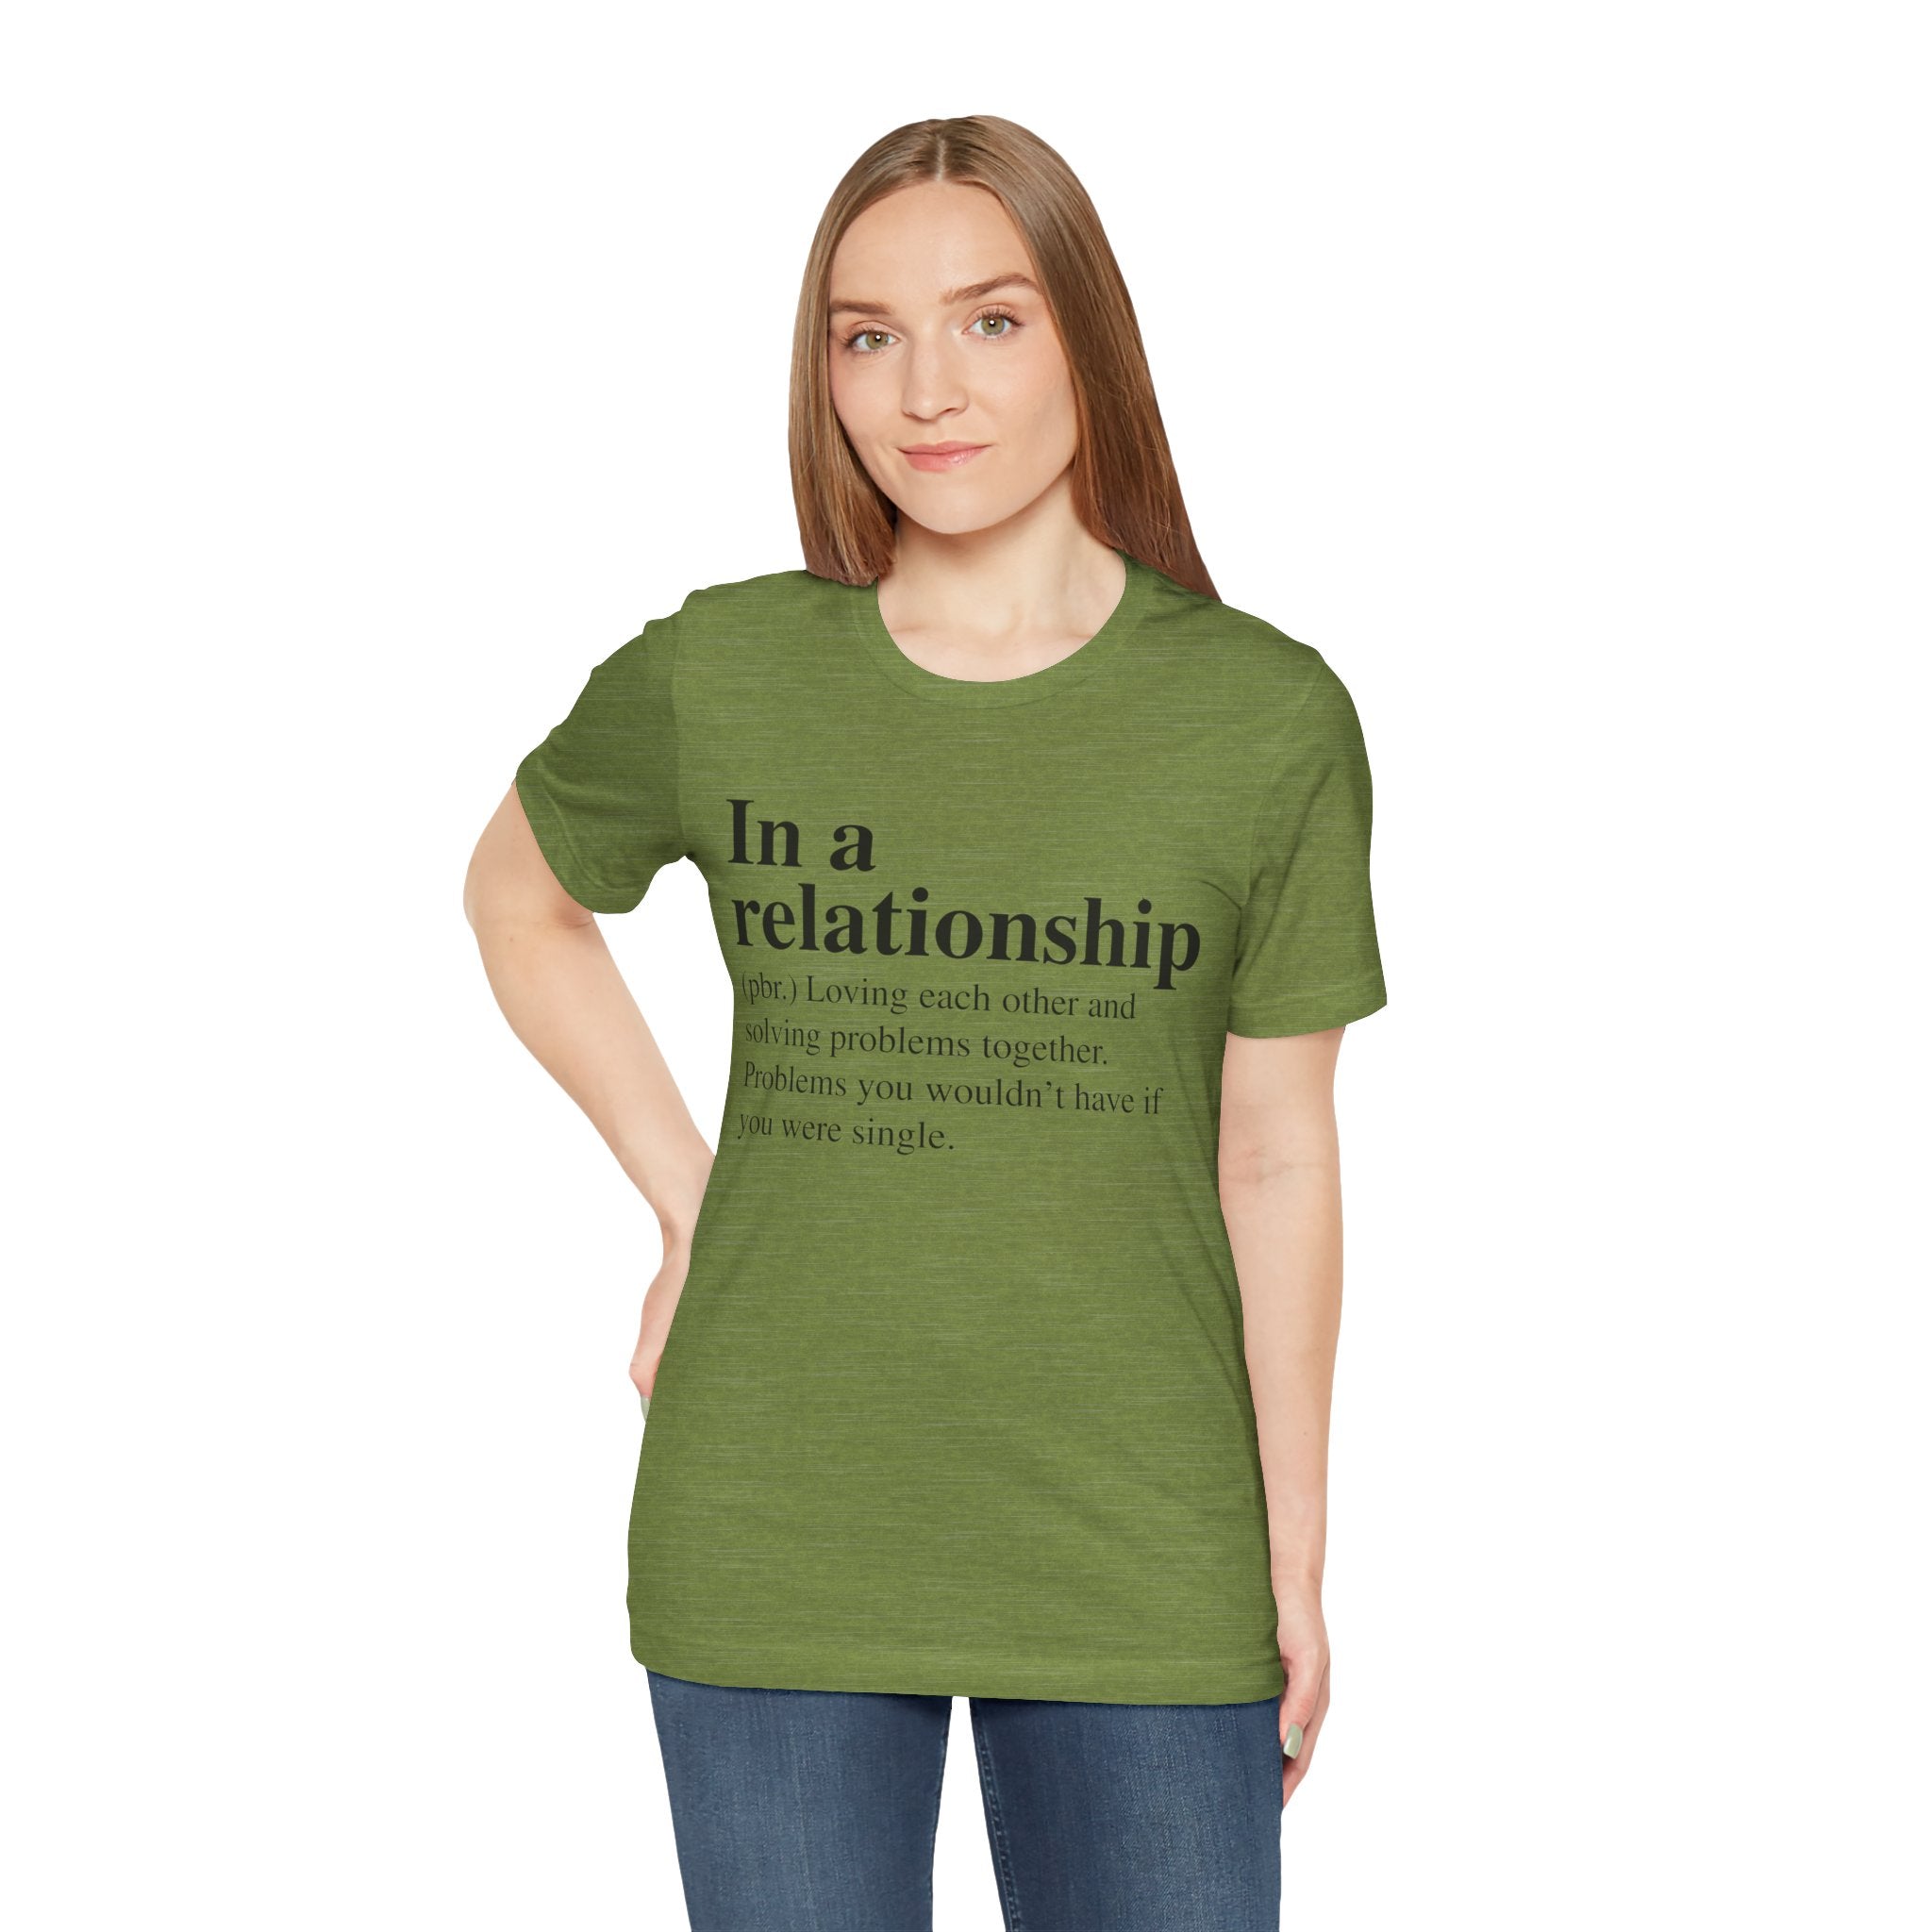 Woman in an In a Relationship T-Shirt with quality print about relationships on the front, posing against a plain background.